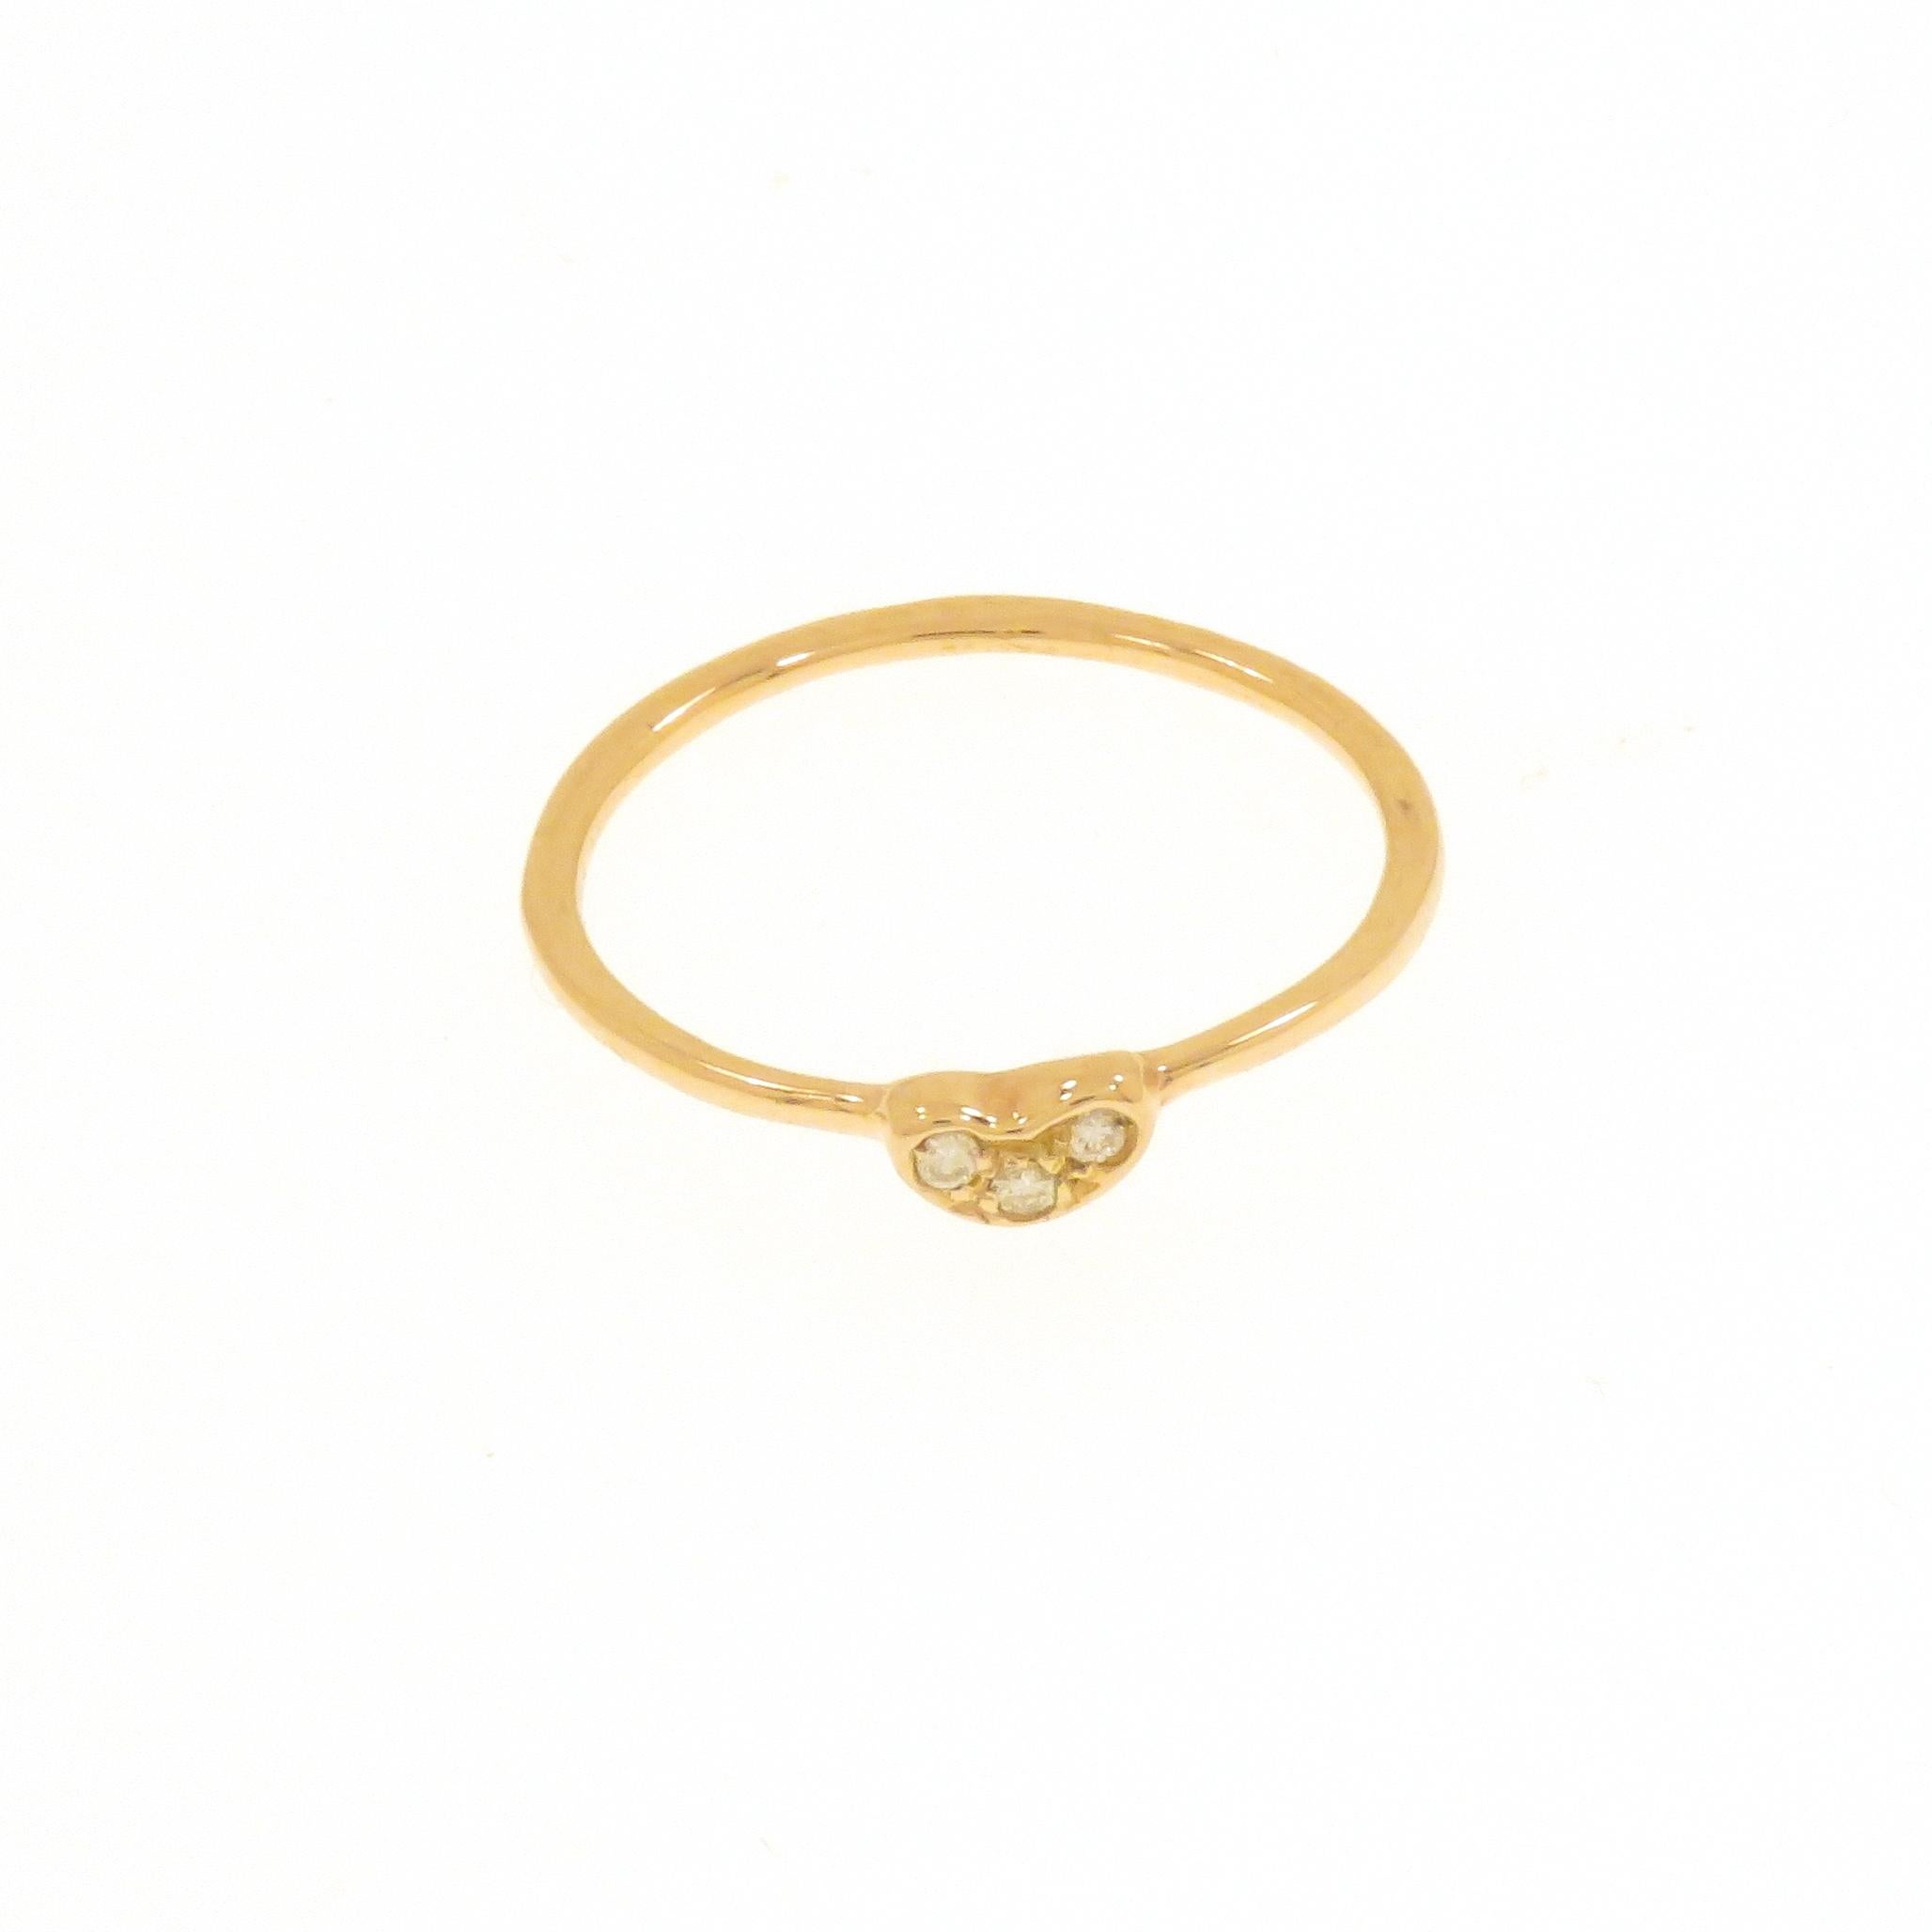 Contemporary Diamonds Rose Gold Stacking Ring Handcrafted in Italy by Botta Gioielli For Sale